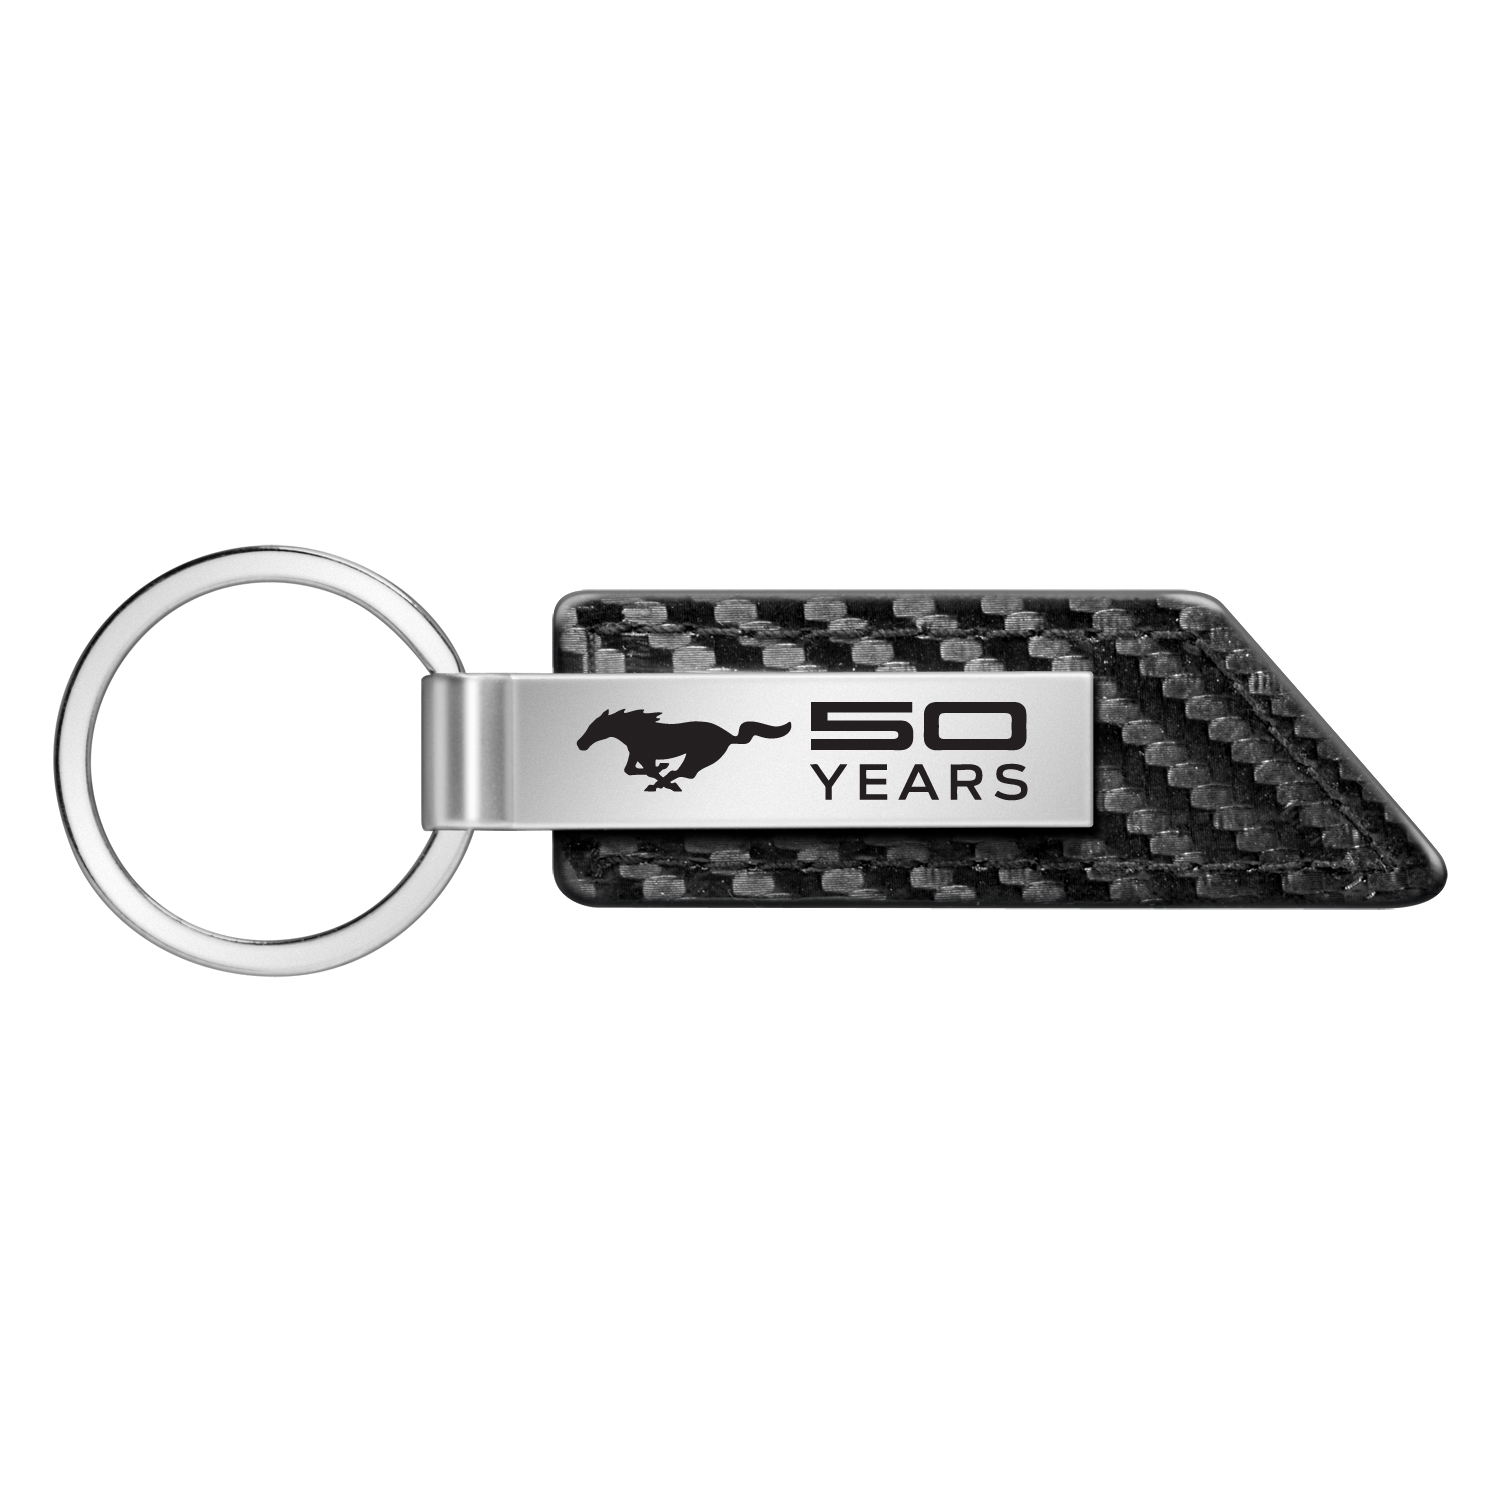 Ford Mustang 50 Years Carbon Fiber Texture Black Leather Strap Key Chain